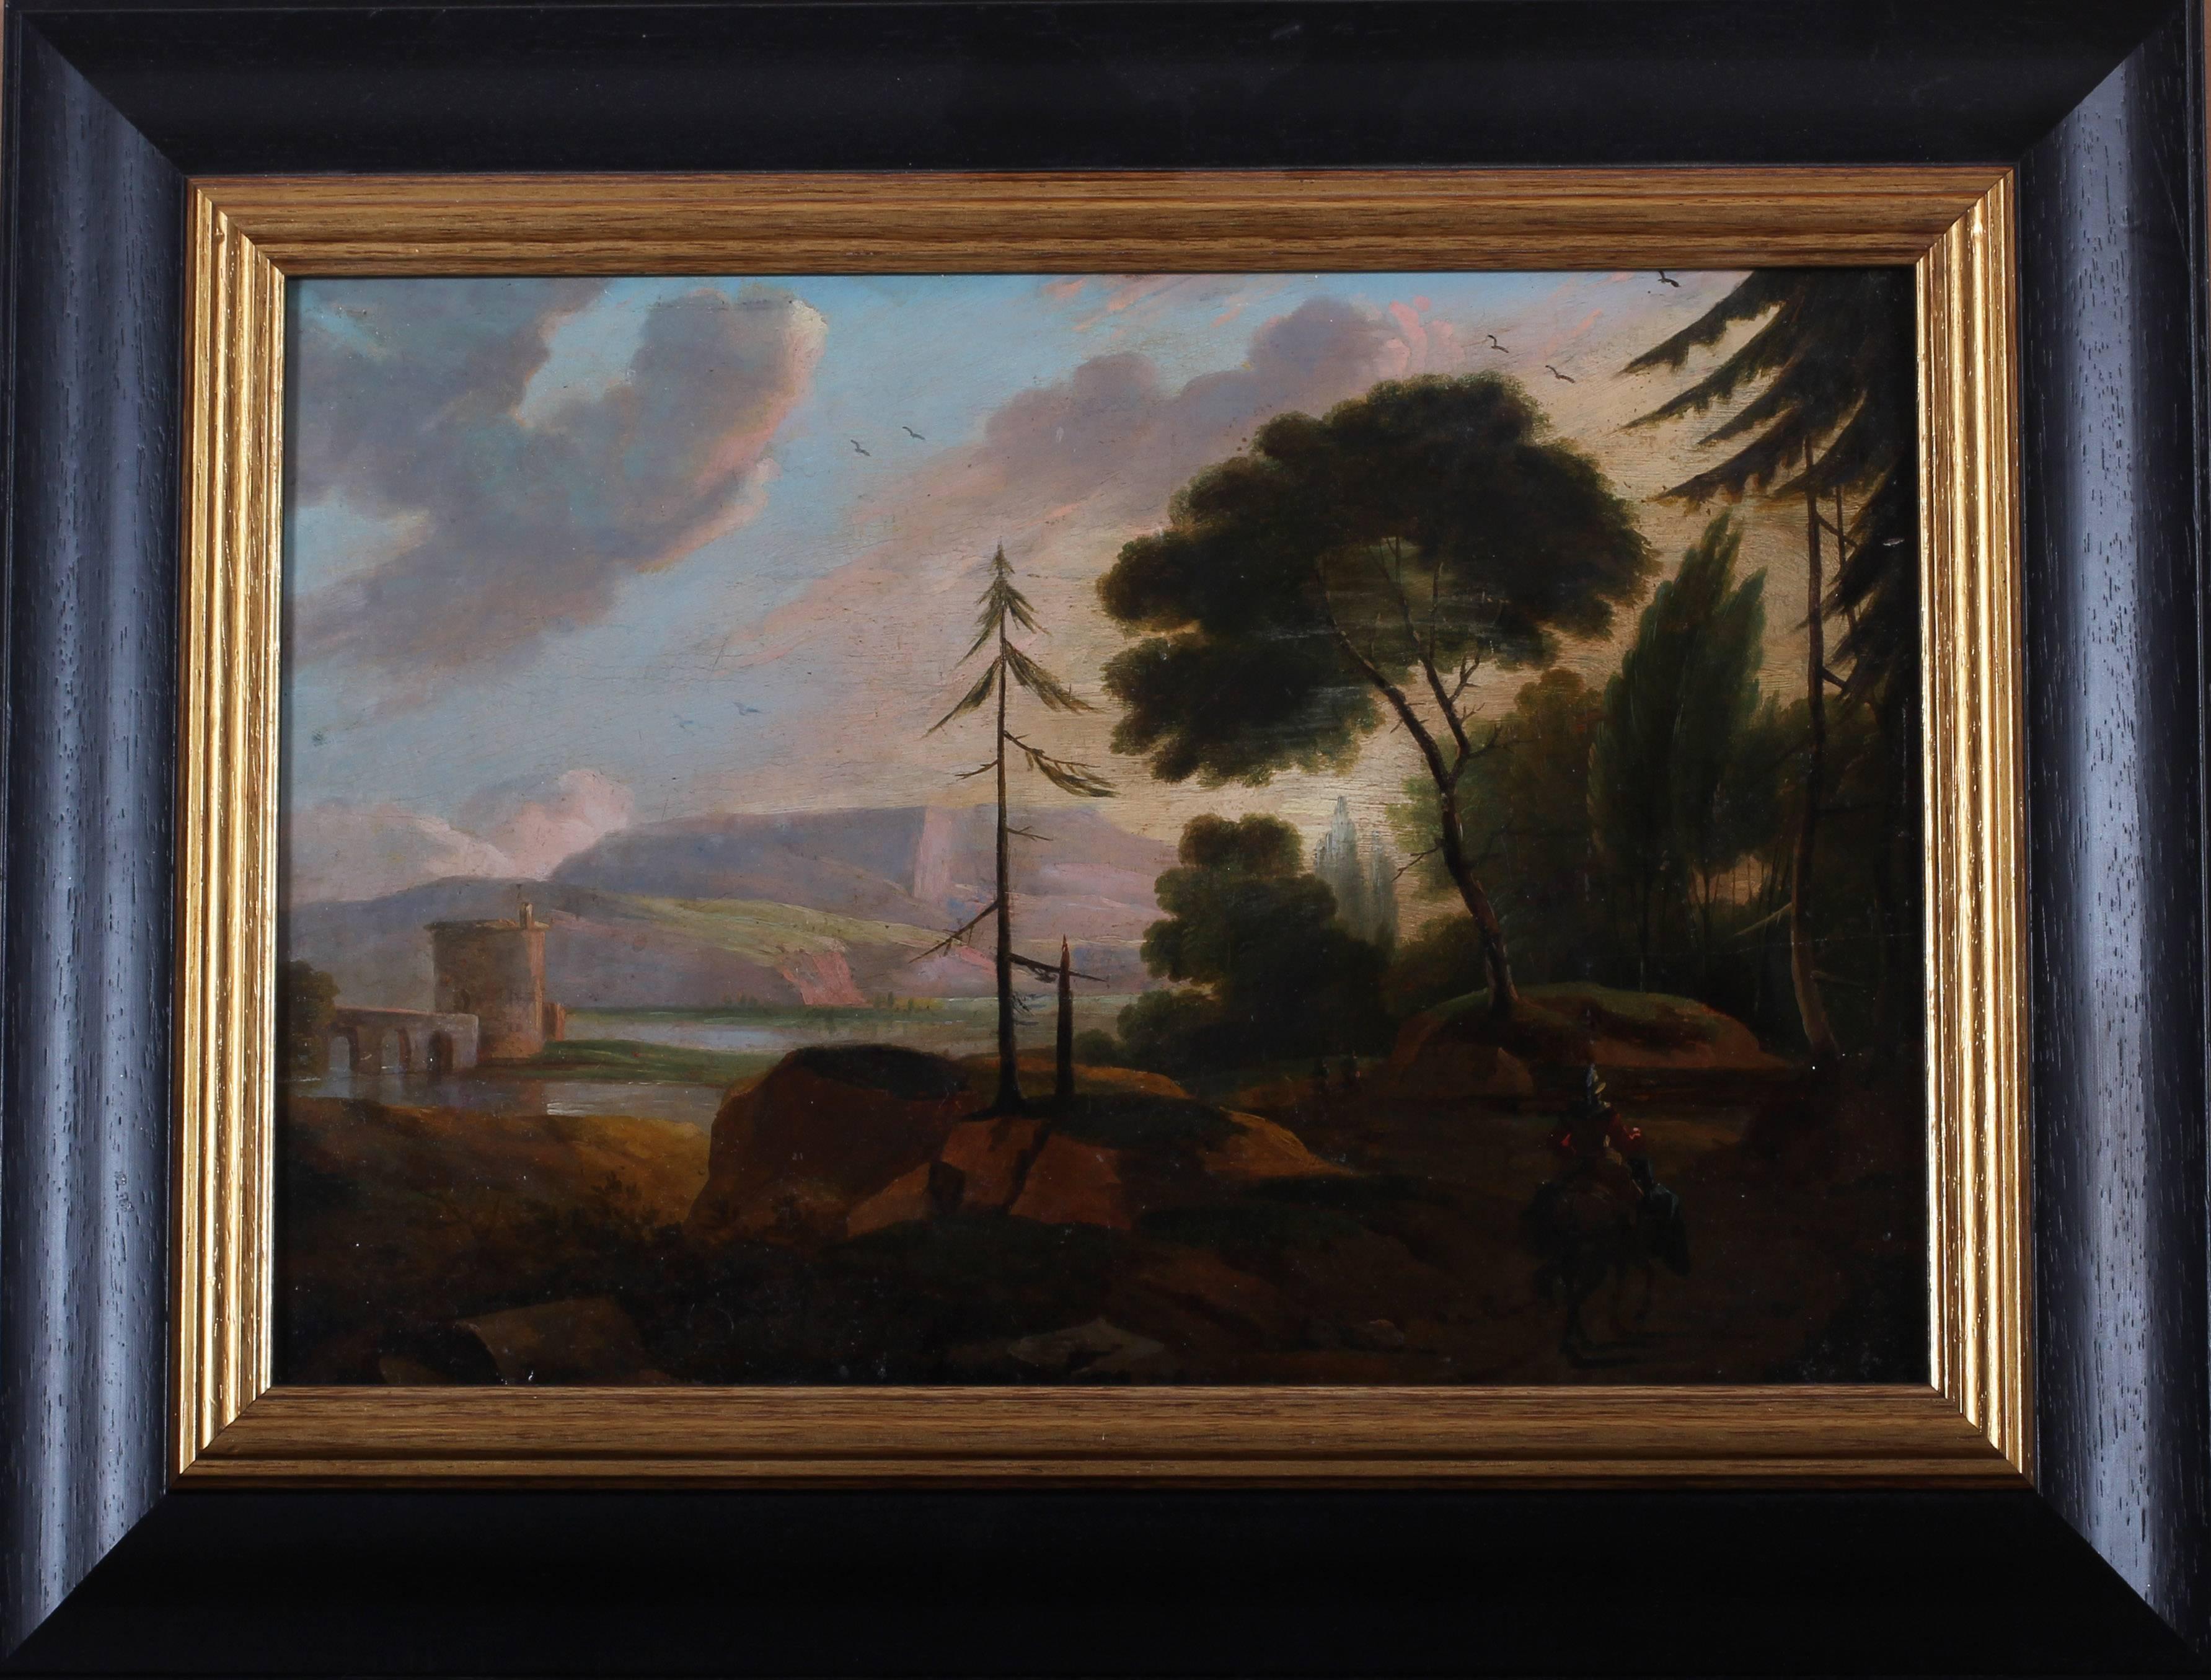 Soldier travelling by the side of a lake - Black Landscape Painting by Unknown